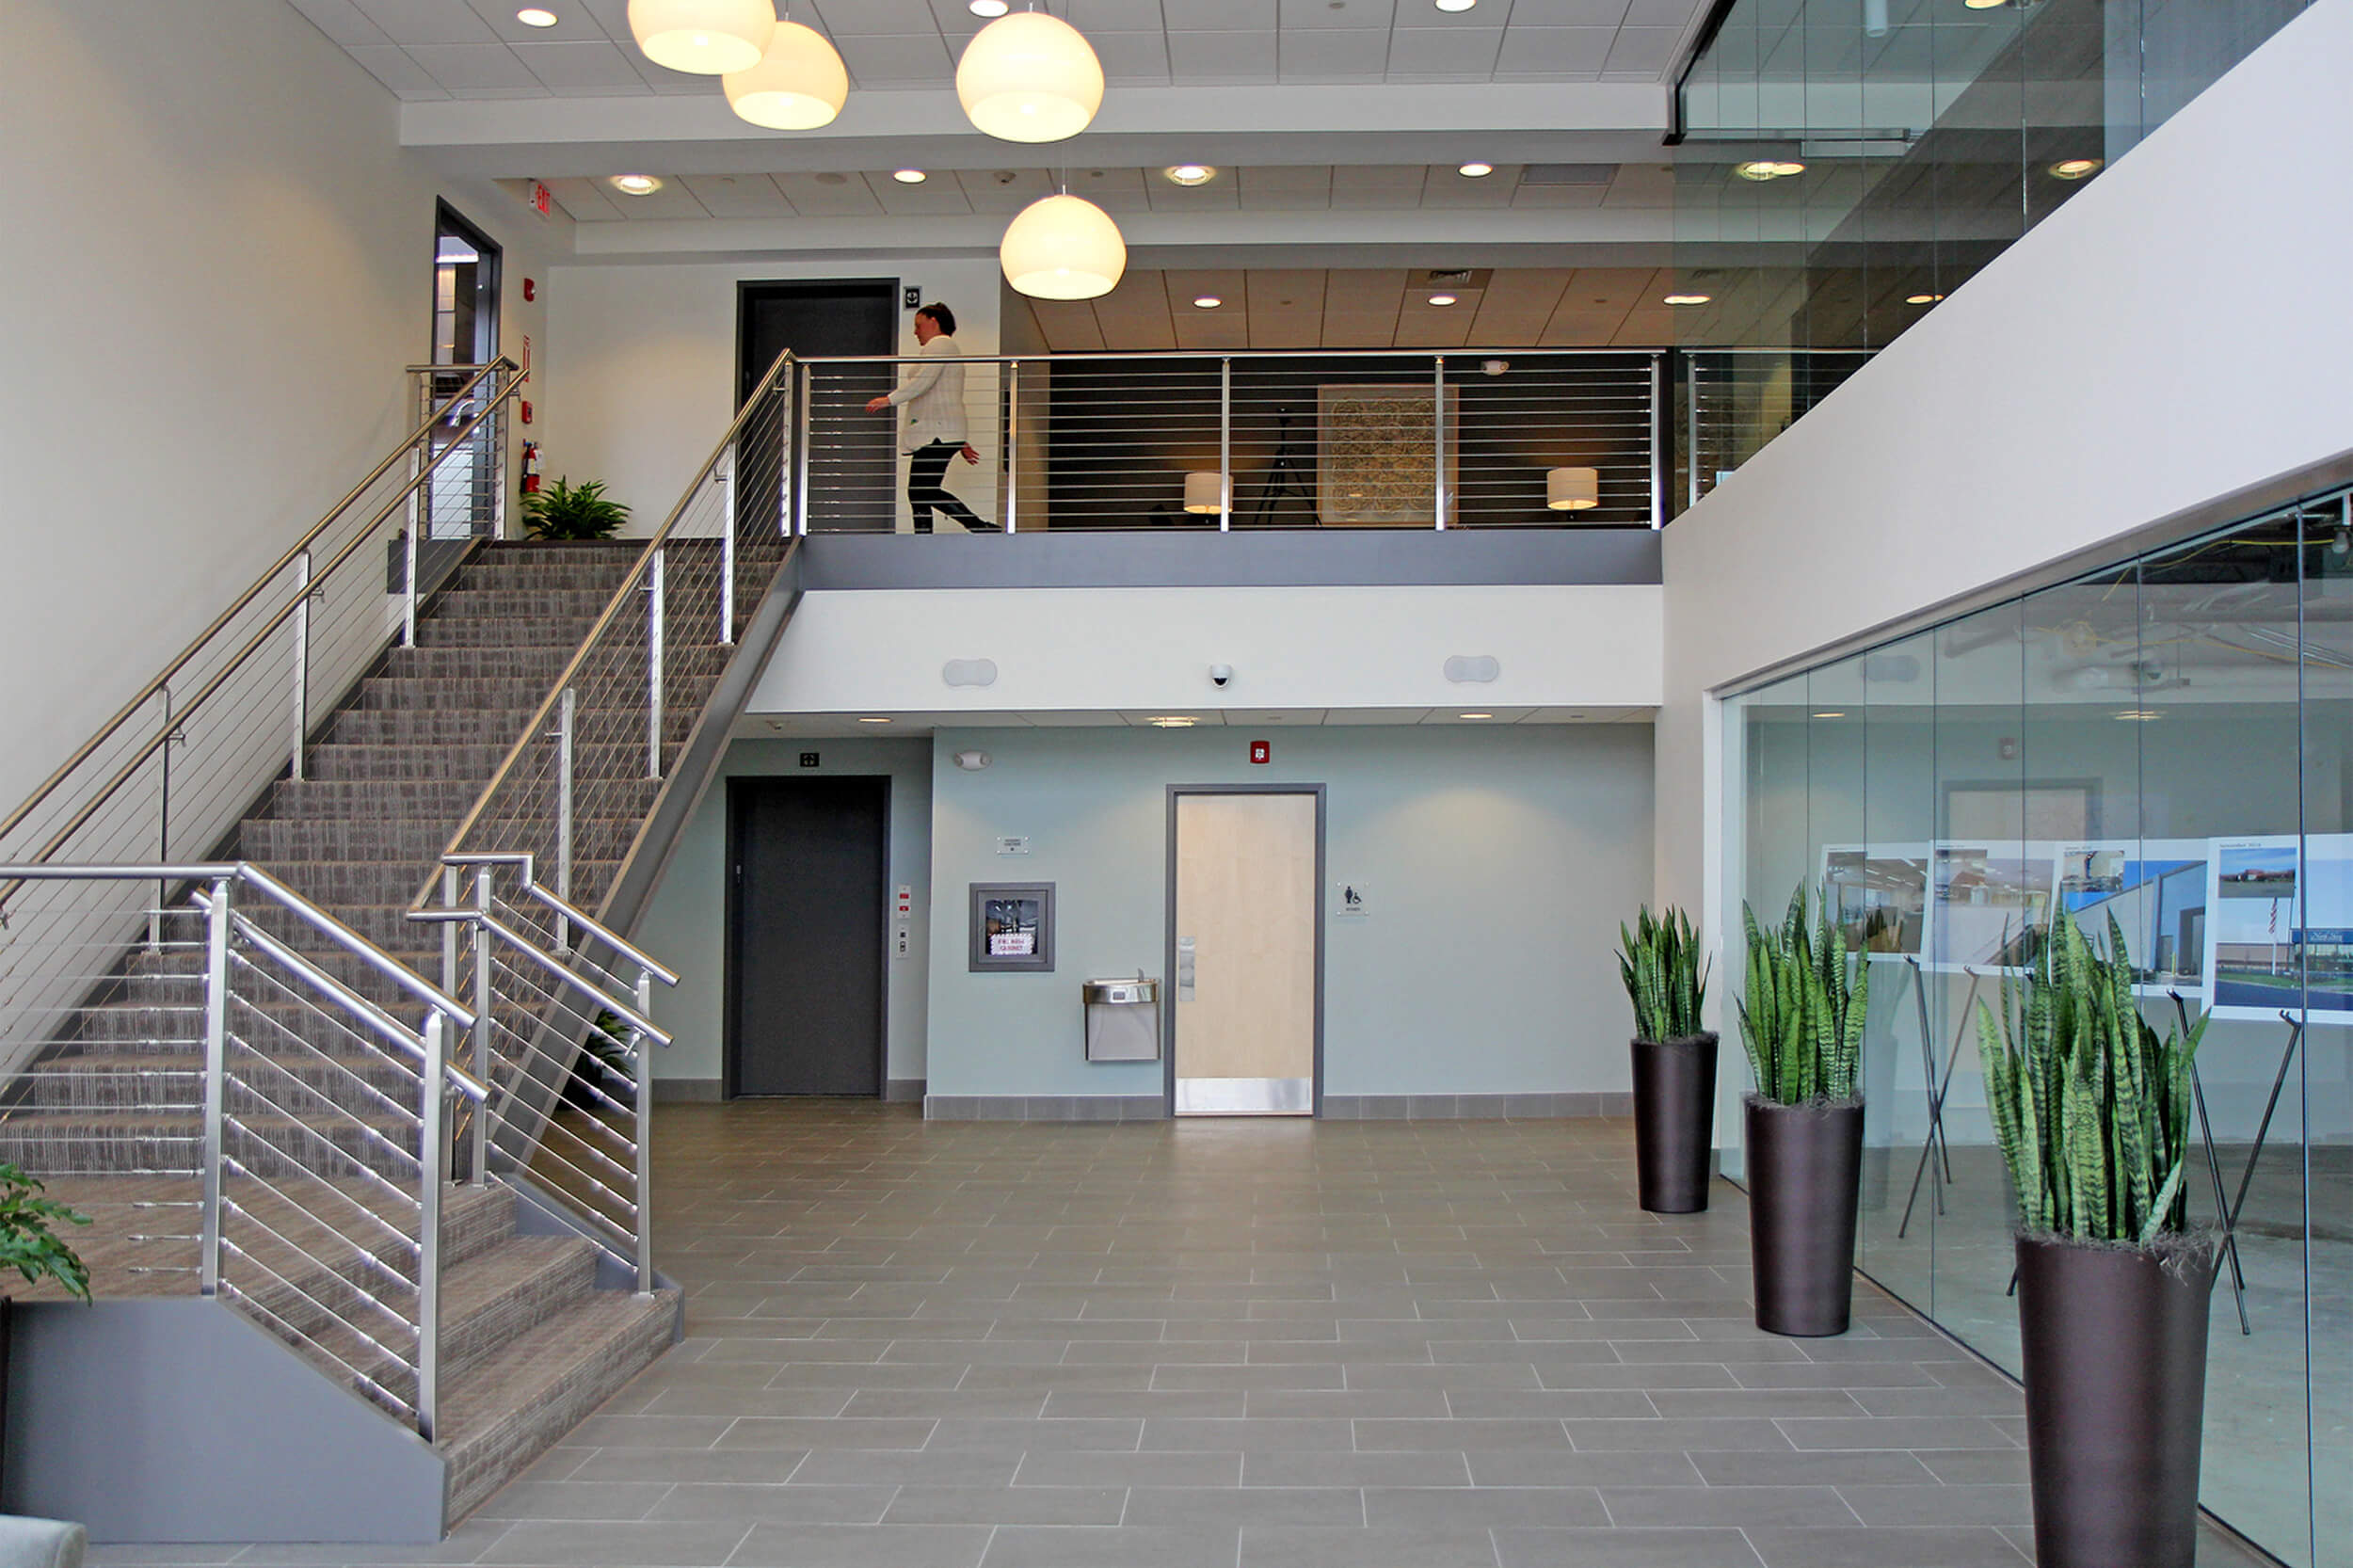 Interior photo of the lobby entrance to a coporate office space. The floor and walls are neutral grey tones, and a staircase on the left leads to a second floor. Plantings and a reception desk can be seen on the right side of the lower level.